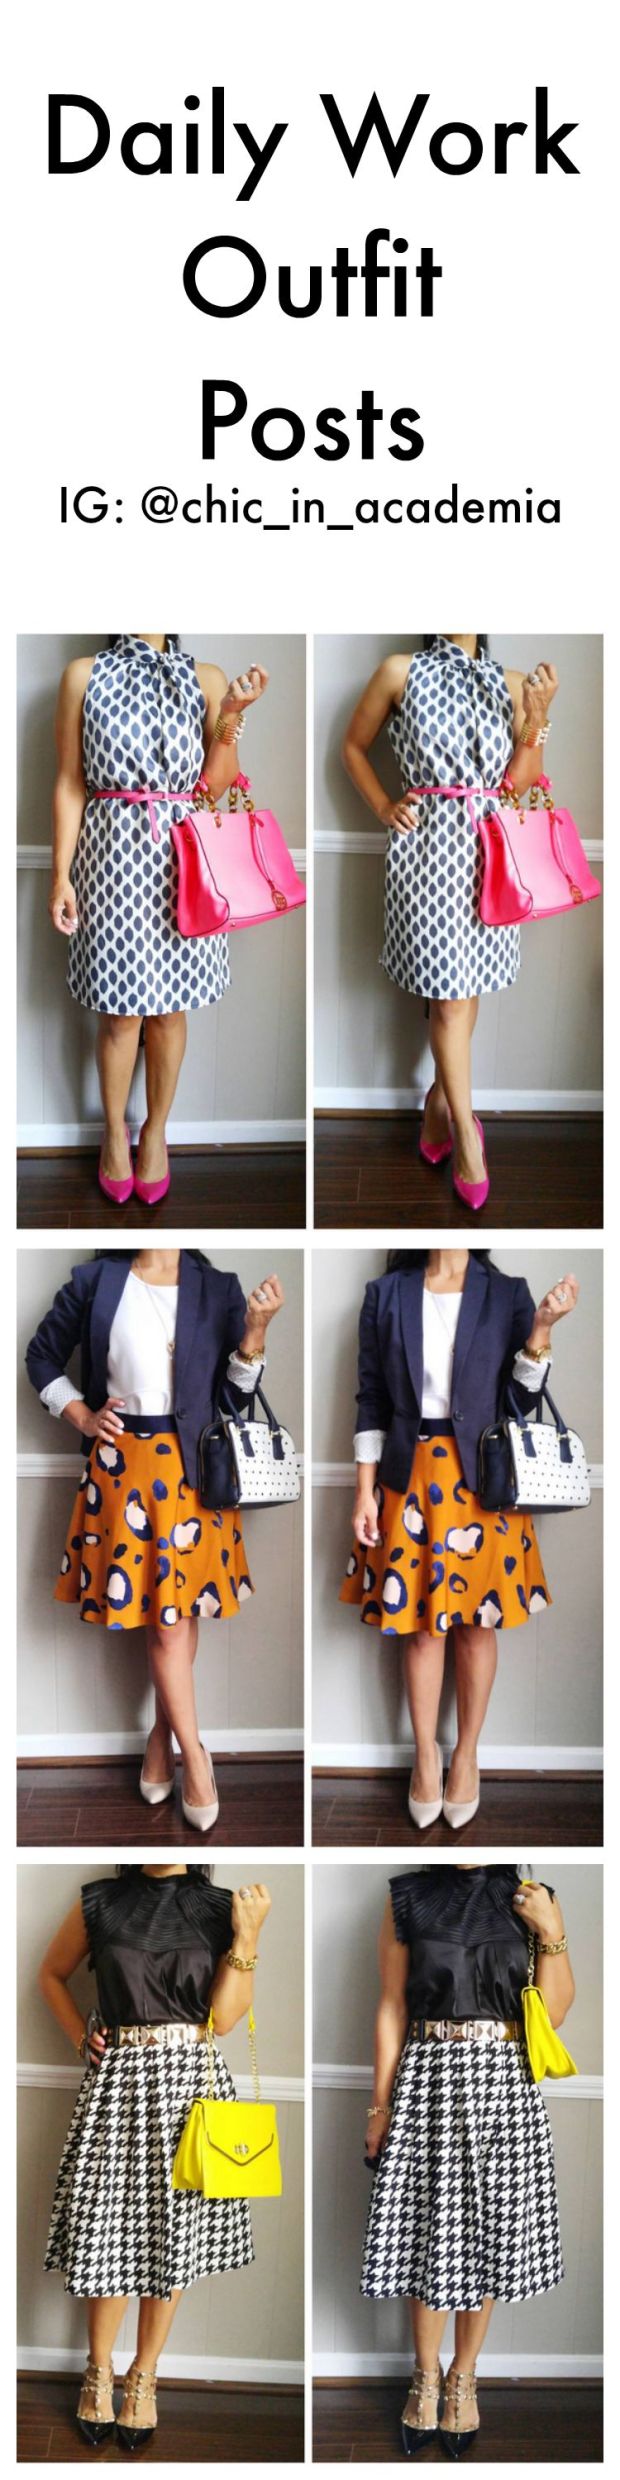 Work Outfits, http://chicinacademia.com